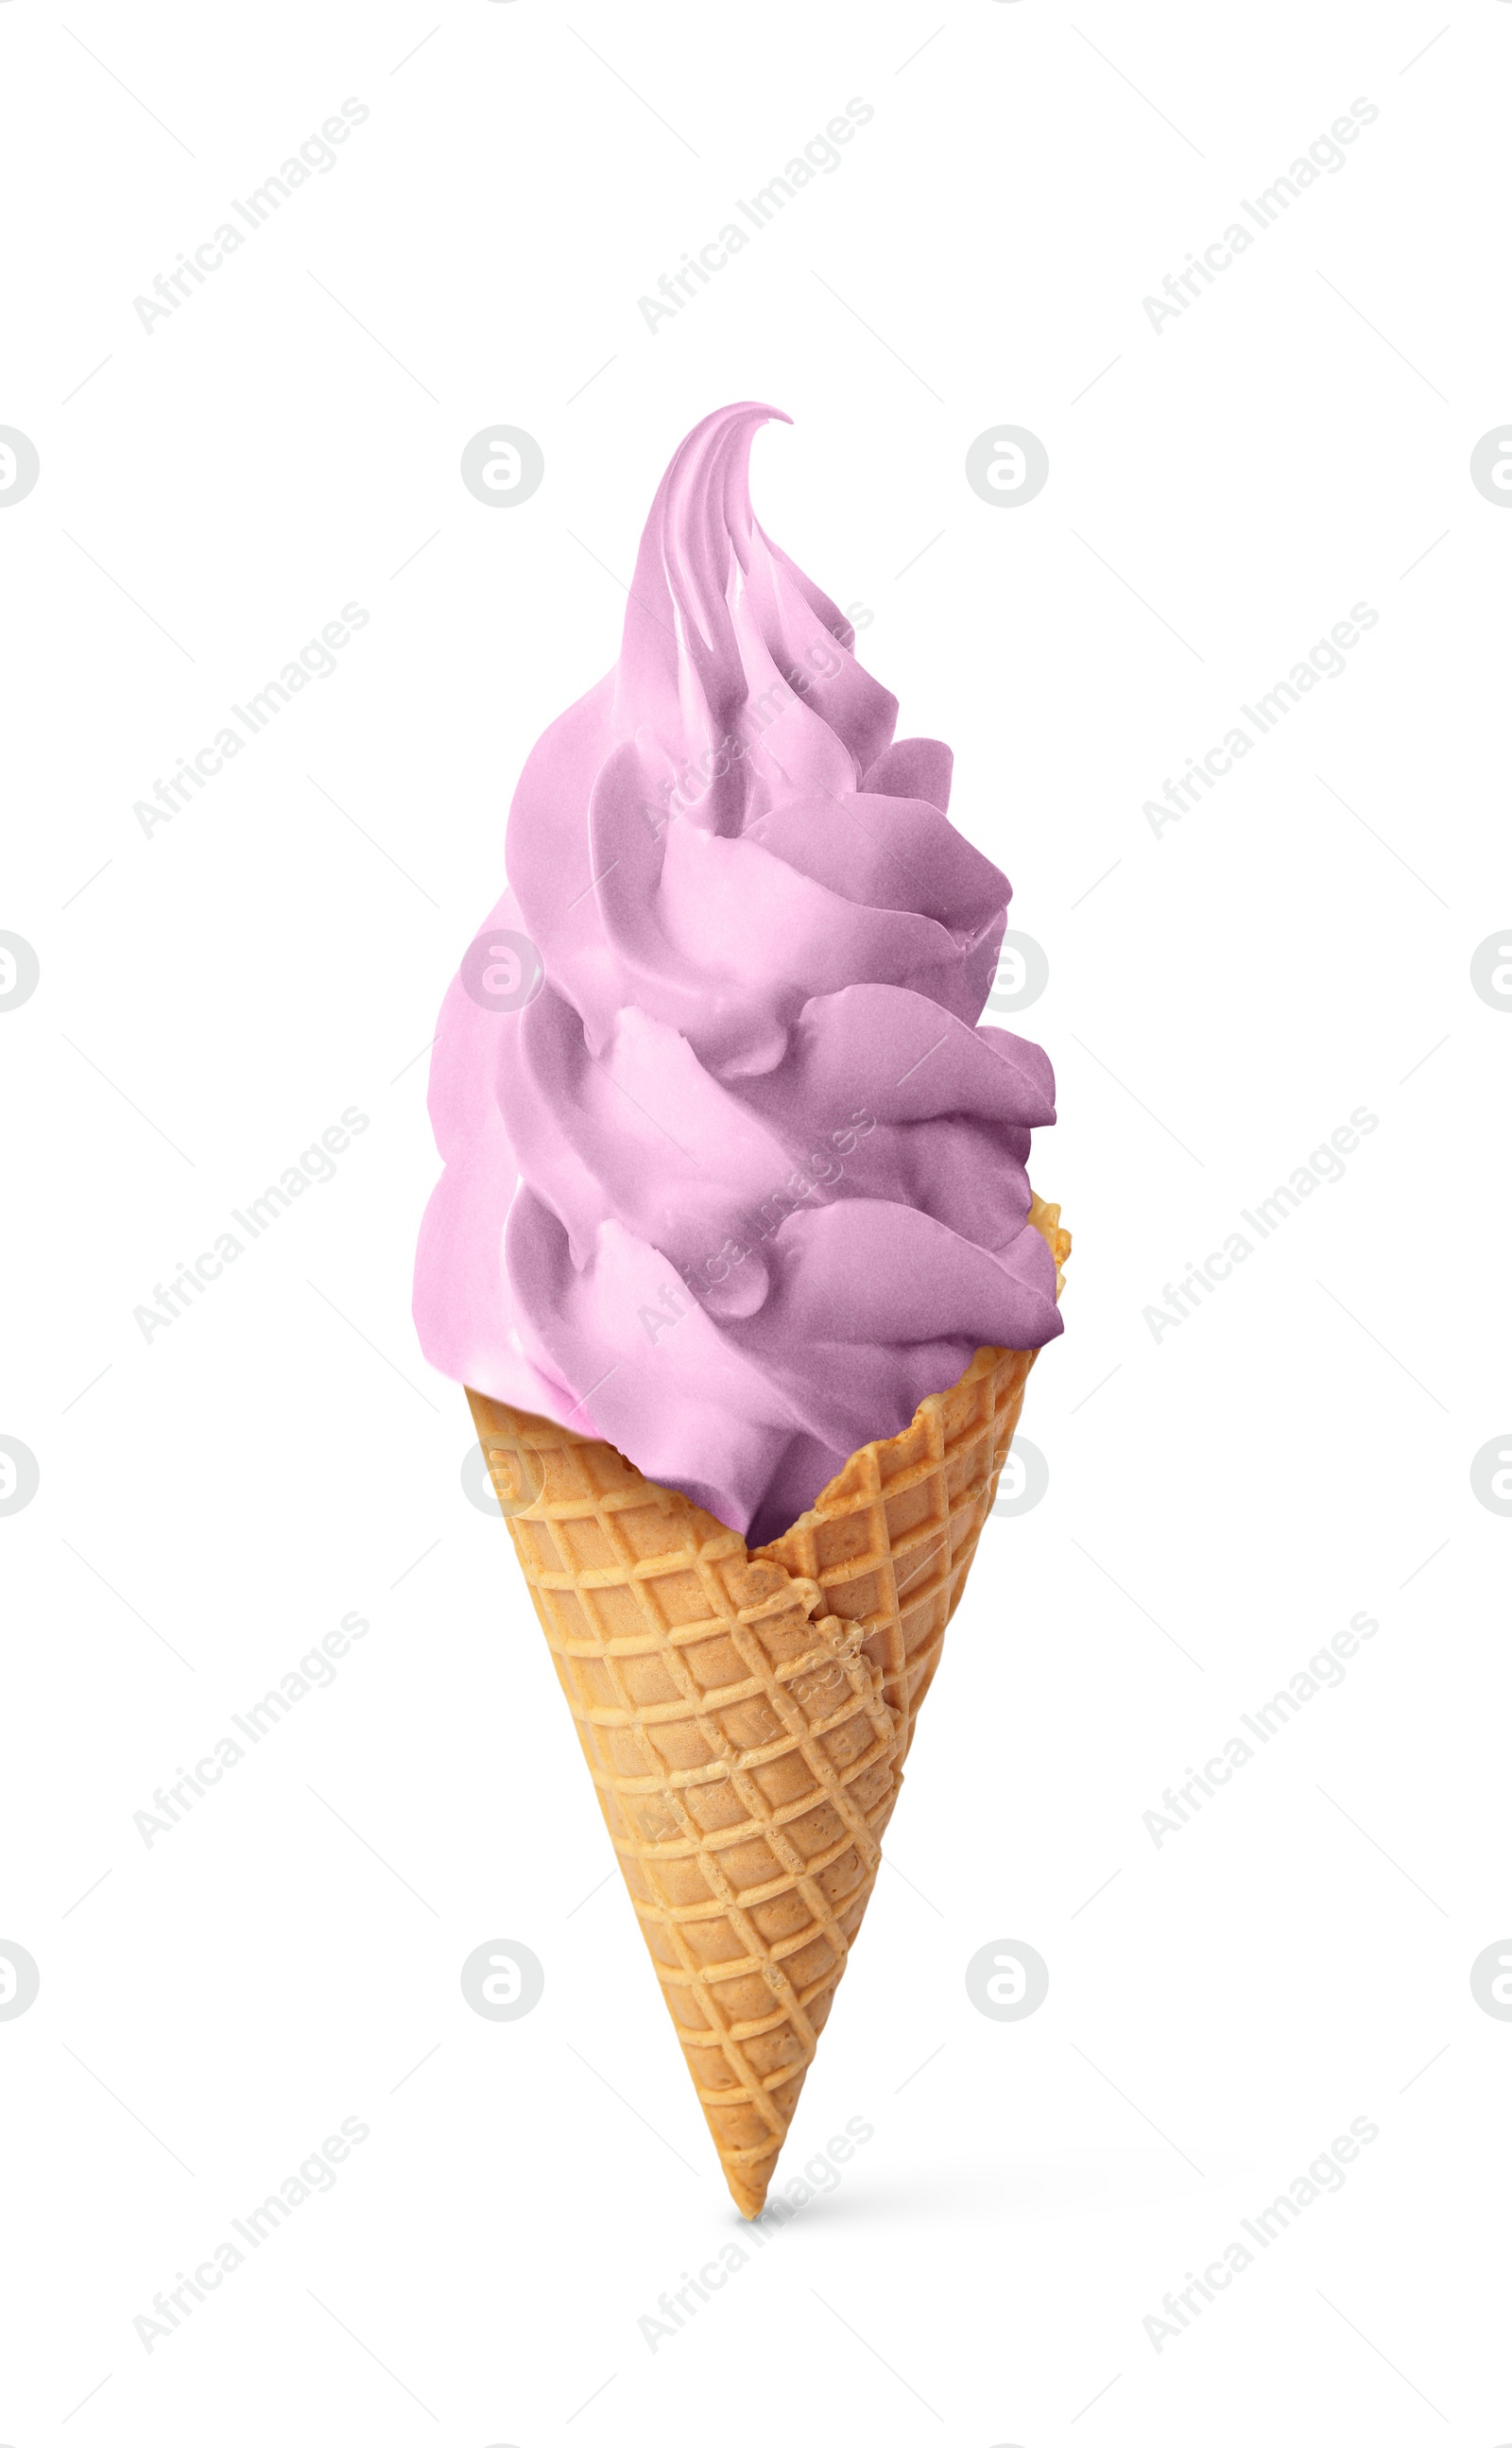 Image of Delicious soft serve berry ice cream in crispy cone isolated on white